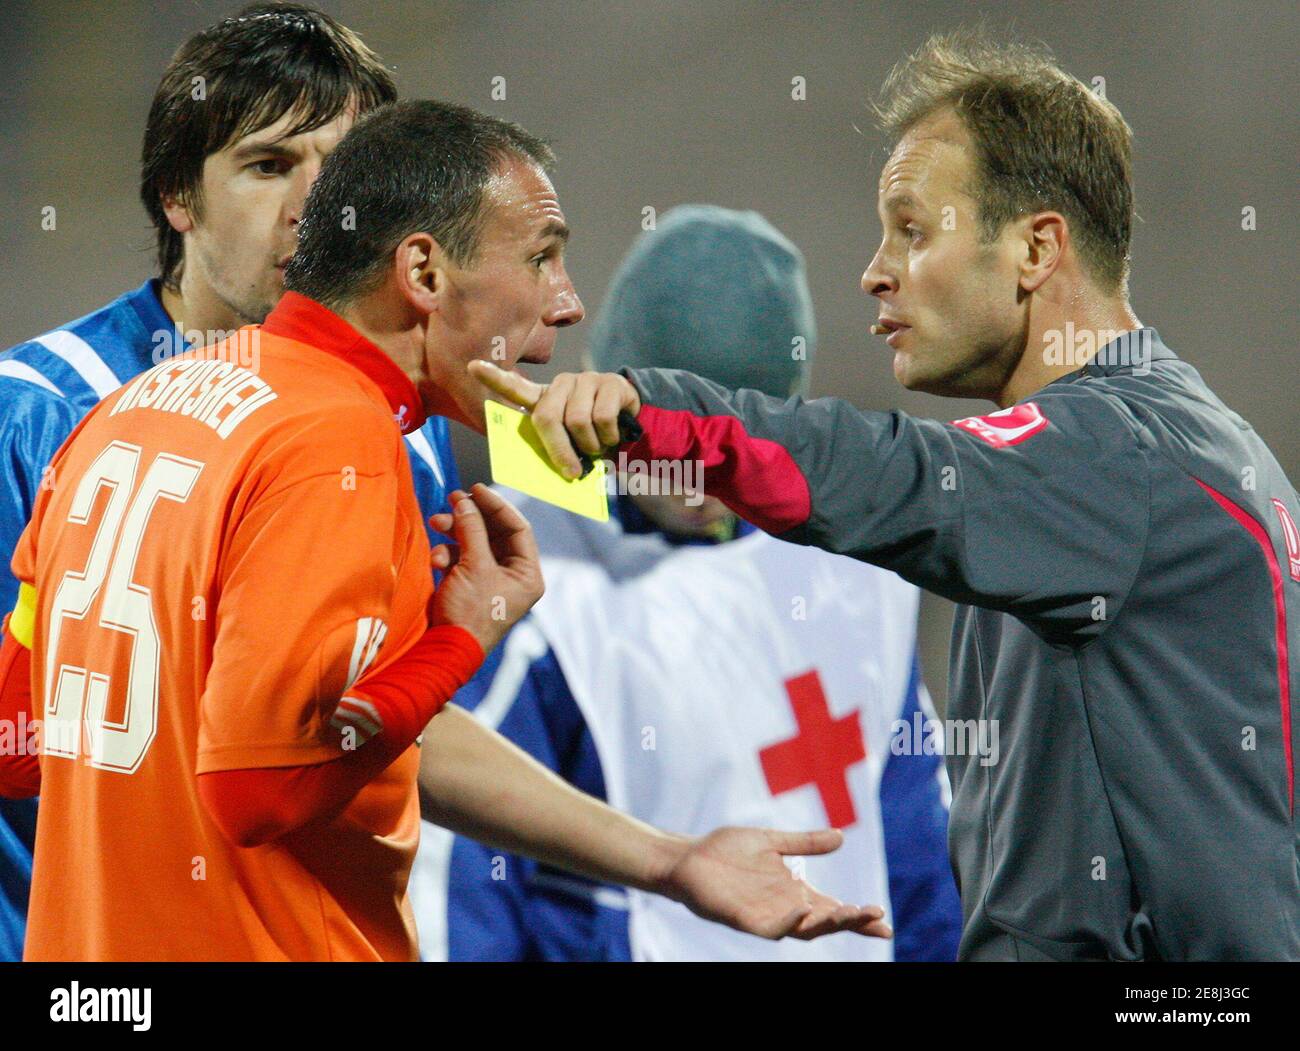 Litex Lovetch's Radostin Kishishev (L) argues with the referee after receiving a yellow card during his team's Bulgarian League soccer match against Levski Sofia at Georgy Asparuhov stadium in Sofia November 25, 2009.   REUTERS/Oleg Popov   (BULGARIA SPORT SOCCER) Stock Photo